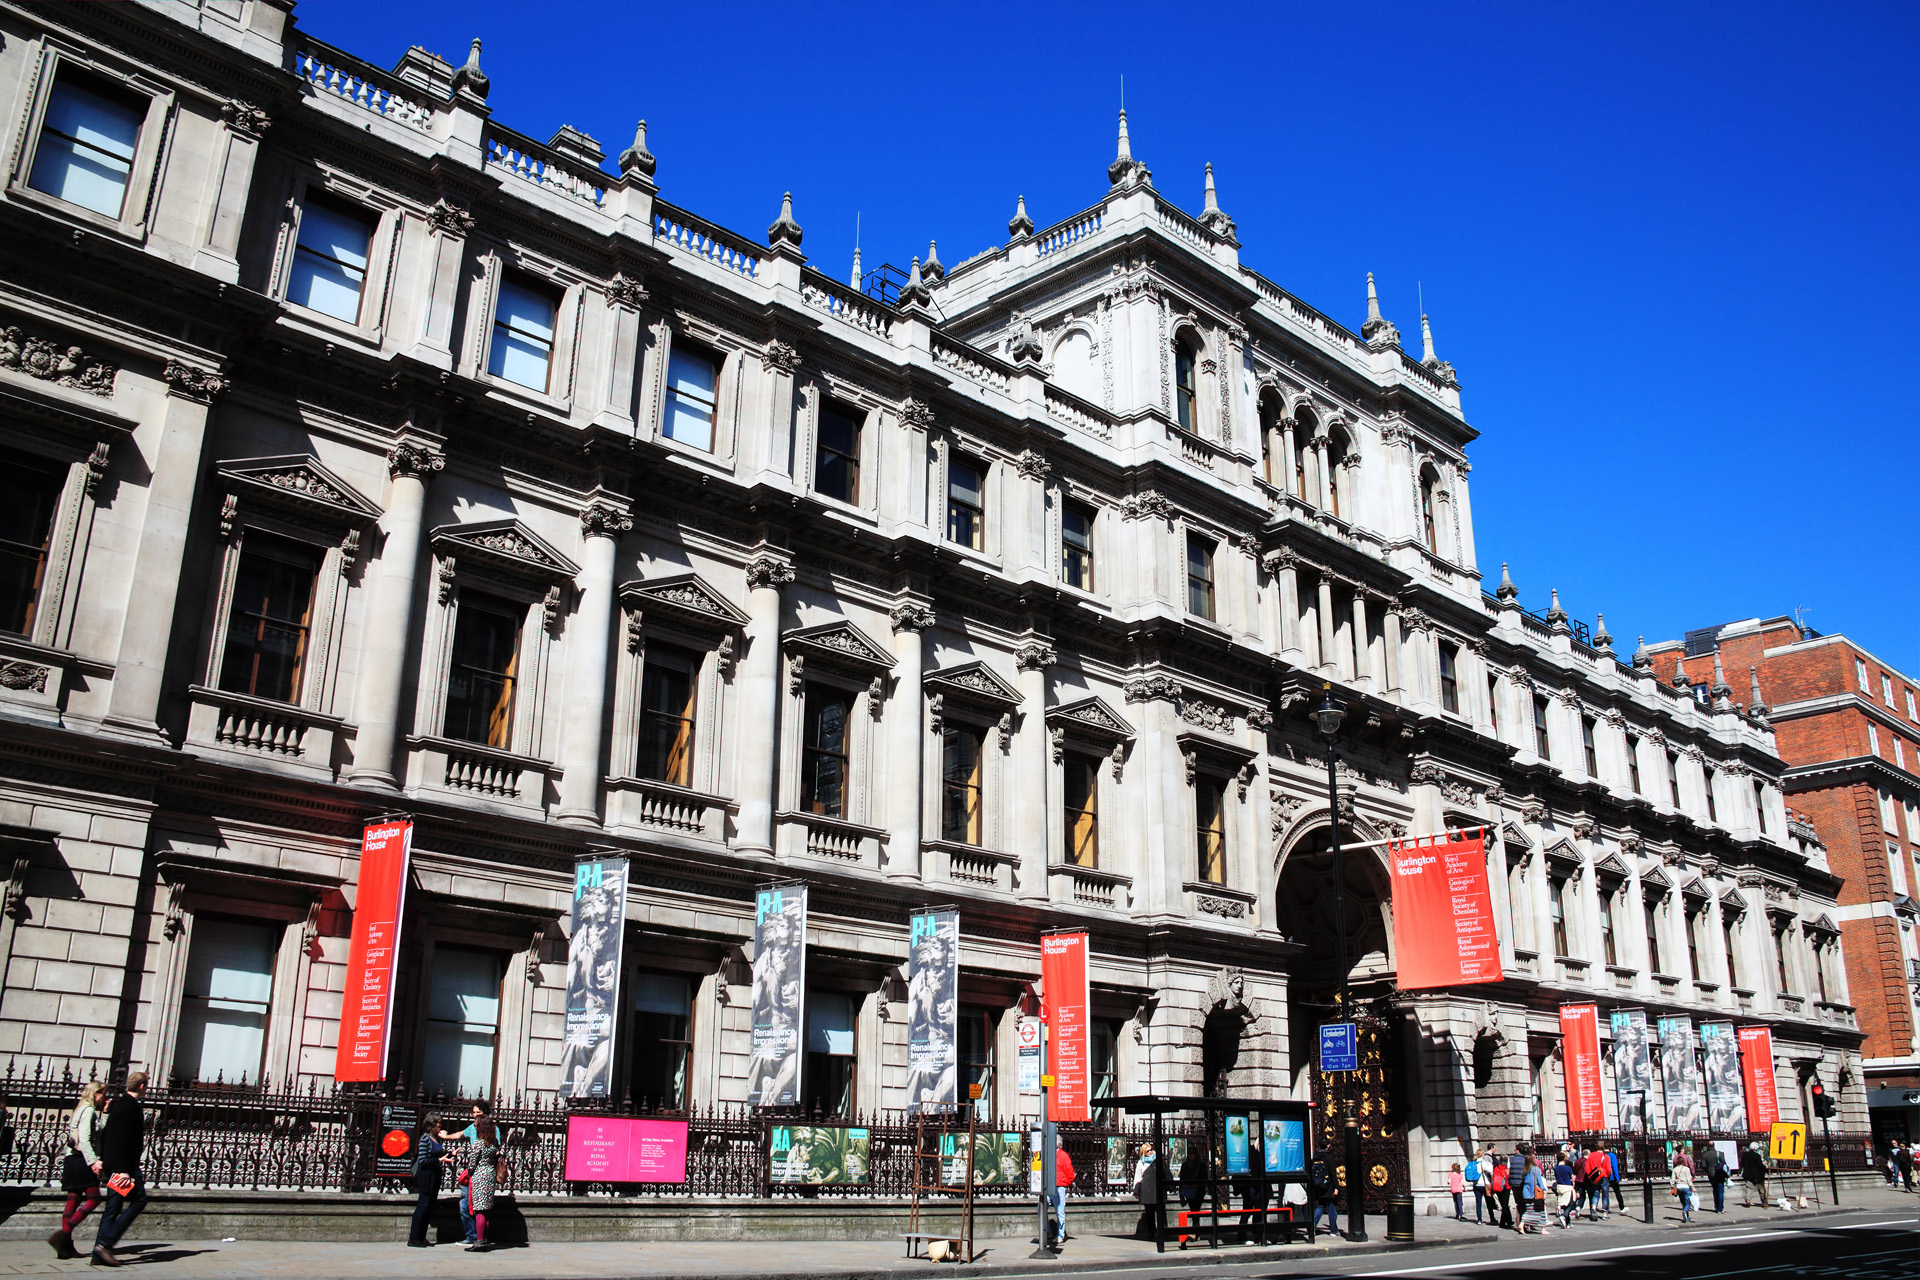 The Royal Academy of Arts is an arts institution based at Burlington House on Piccadilly. The banners are advertising summer exhibitions